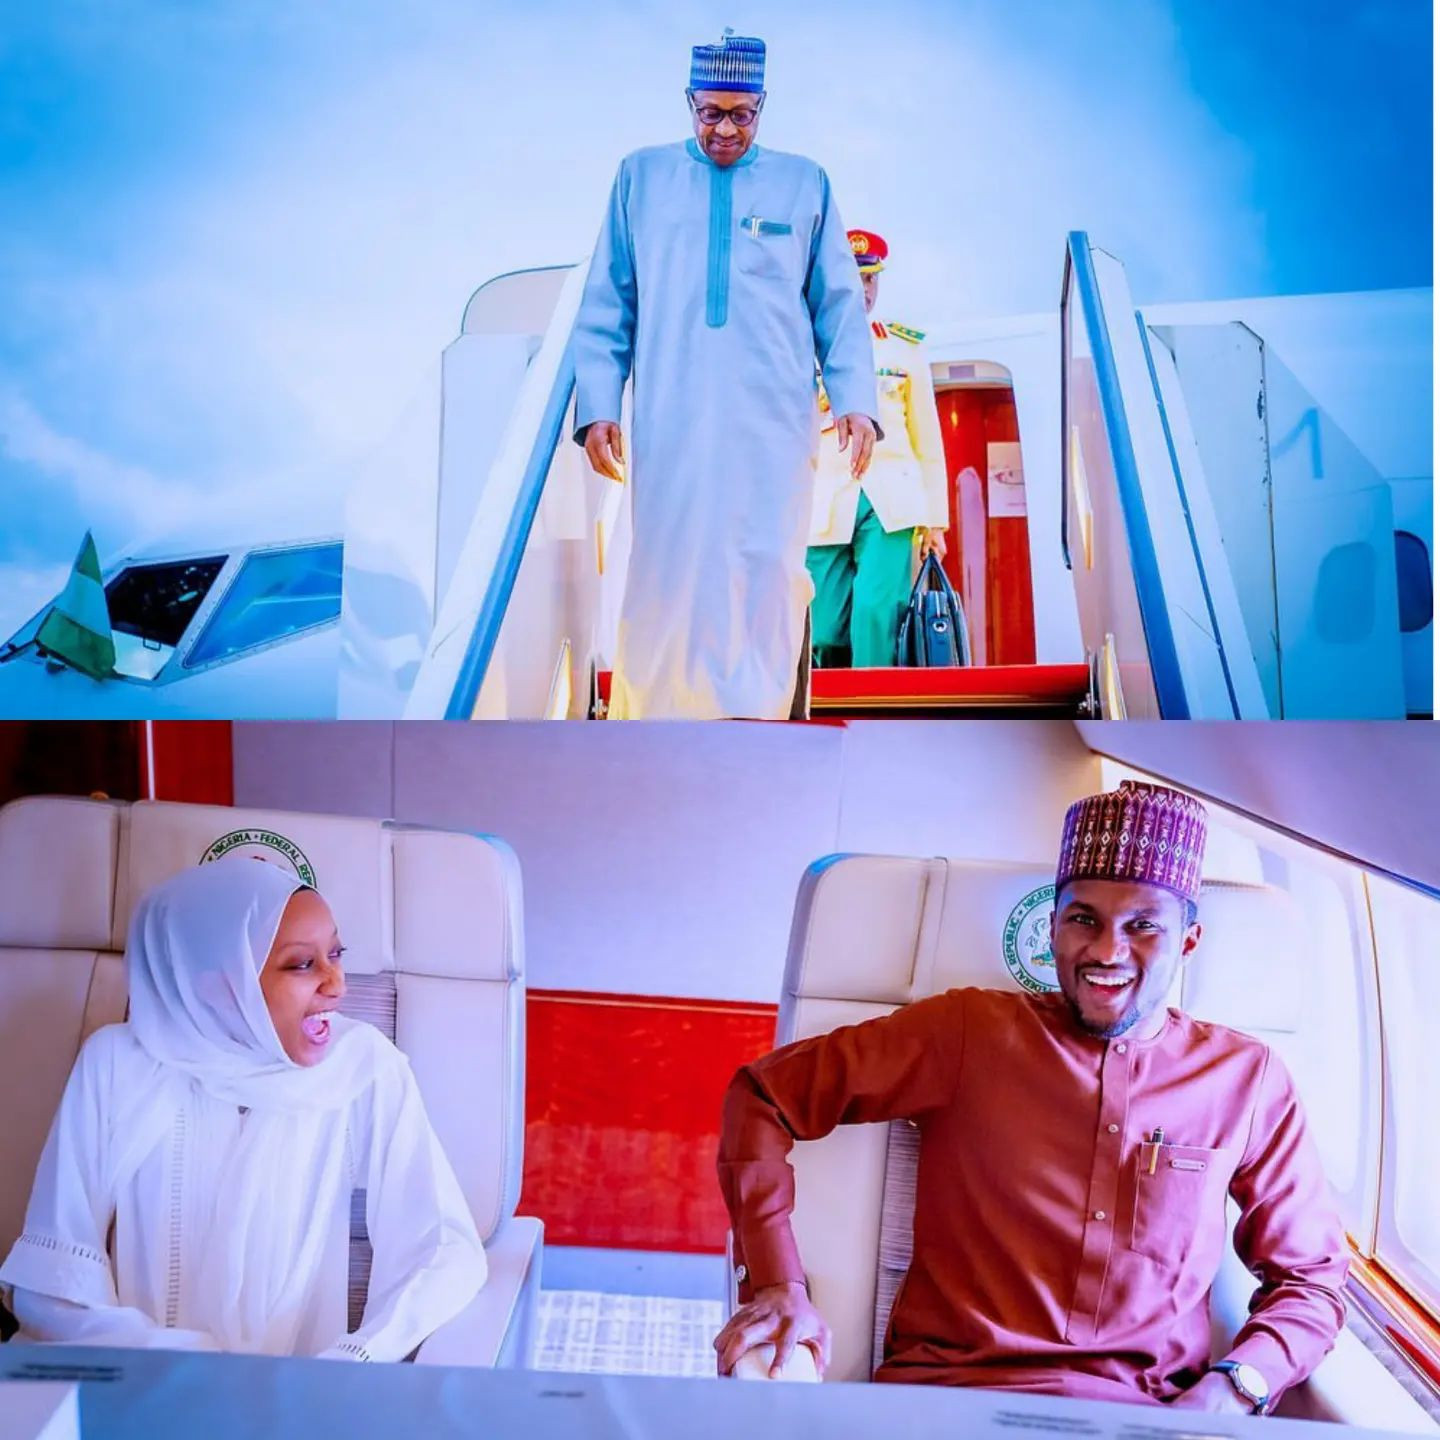 President Buhari returns to Abuja after his participation at the 77th Session of the United Nations General Assembly